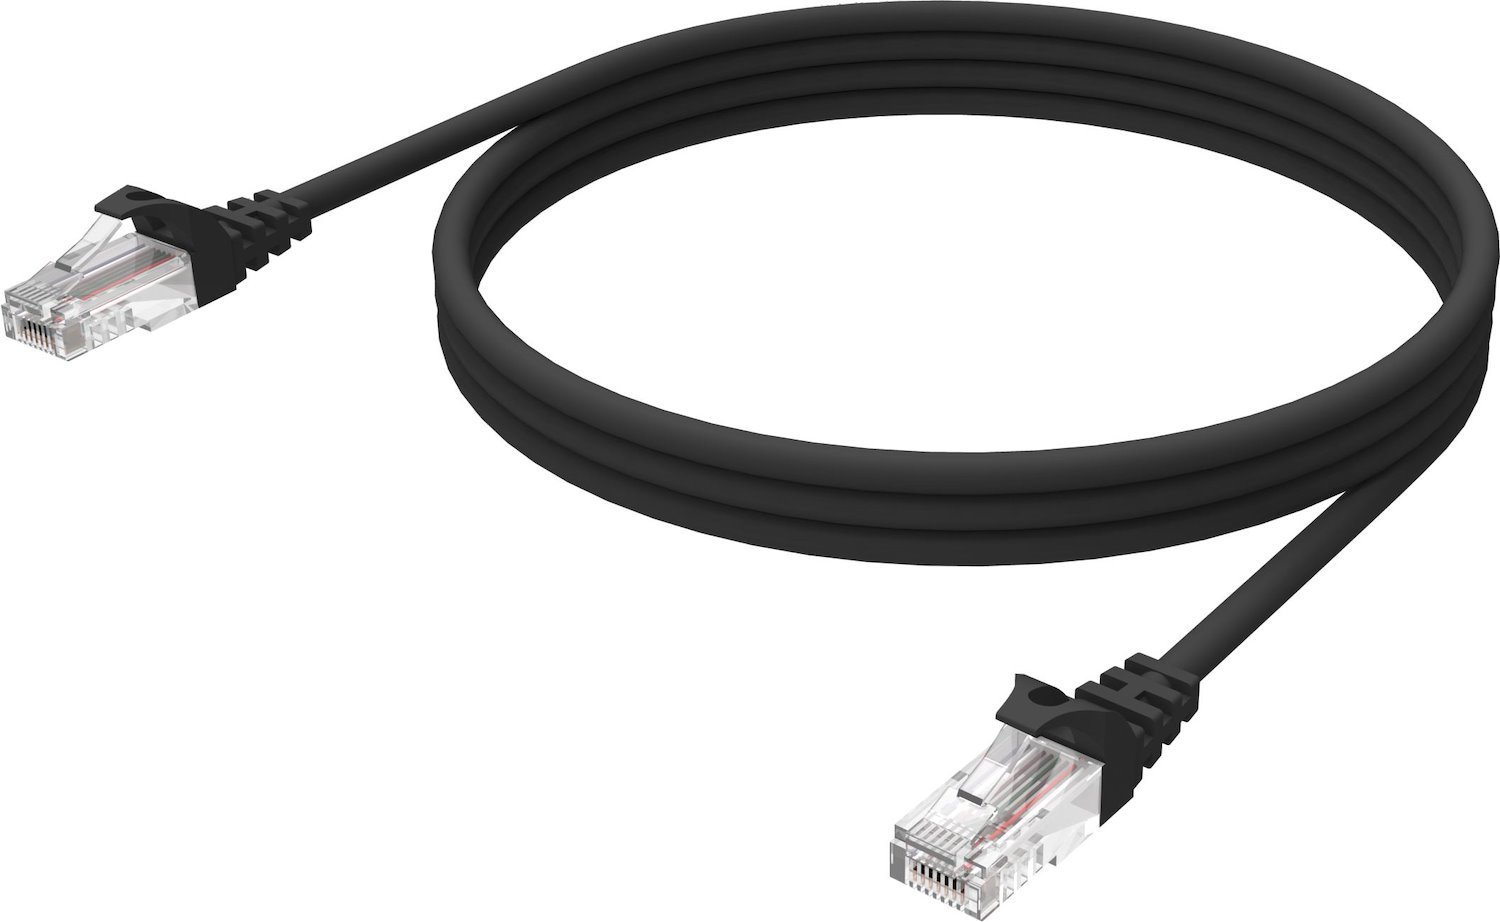 Vision TC 5Mcat6/Bl Networking Cable Black 5 M Cat6 (Vision Professional Installation-Grade Ethernet Network Cable - Lifetime Warranty - RJ-45 [M] To RJ-45 [M] - Utp - Cat 6 - 250 MHz - 24 Awg - Boote